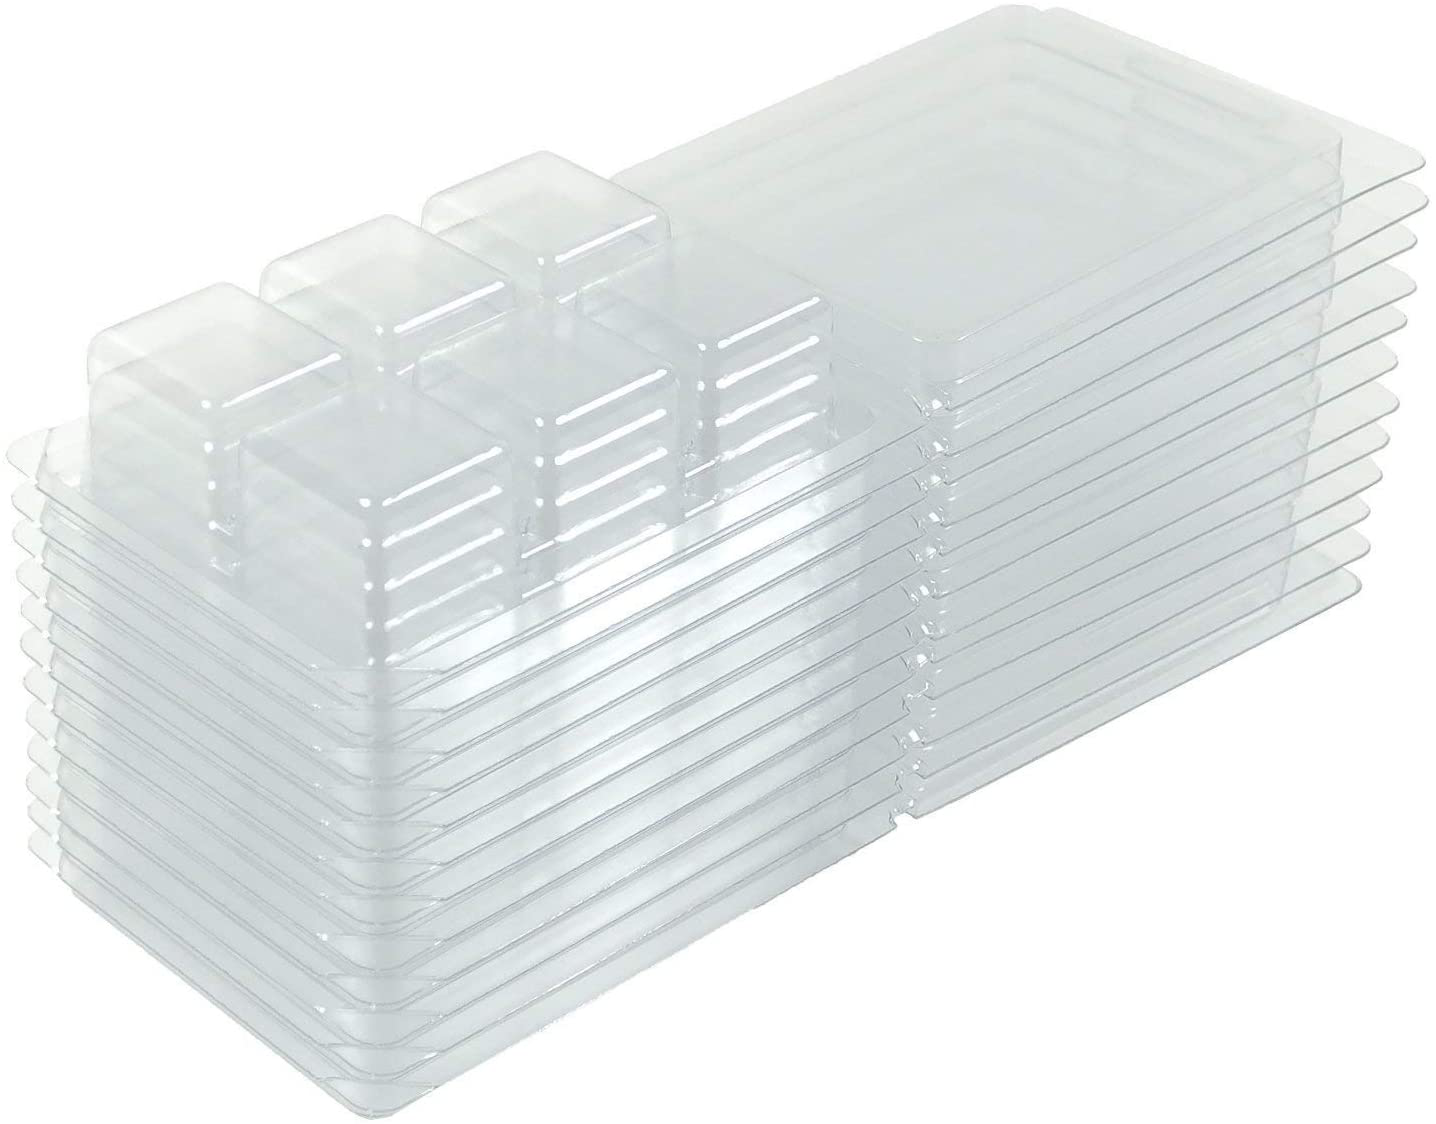 EUPNHY Wax Melt Containers-8 Cavity Clear Empty Plastic Wax Melt Molds-25  Packs Cubes Clamshells for Tarts Wax Melts.